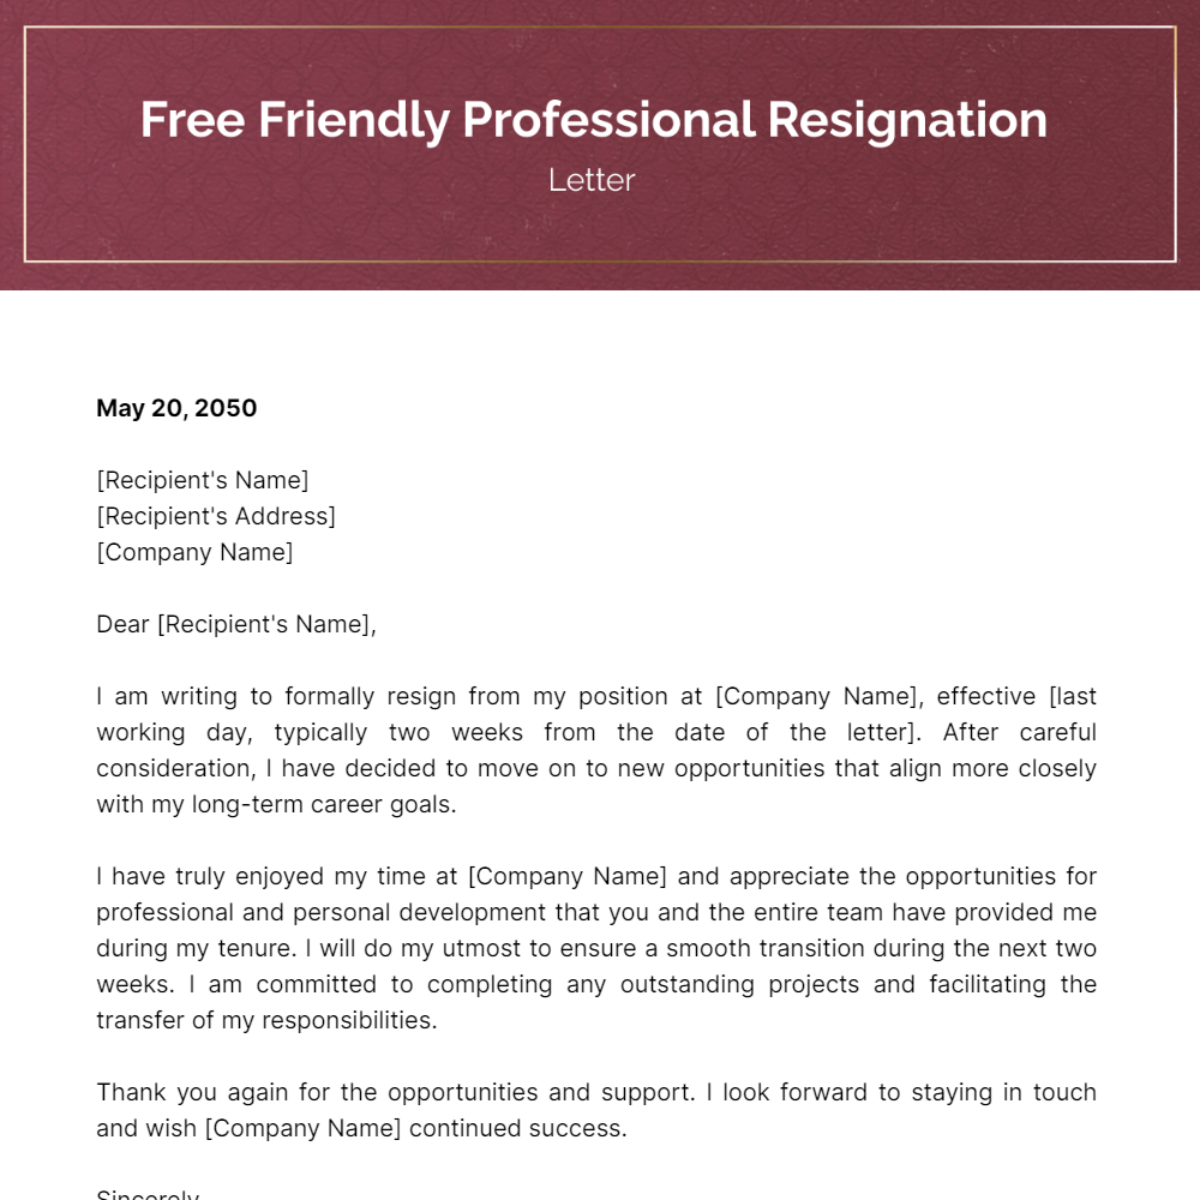 Friendly Professional Resignation Letter Template